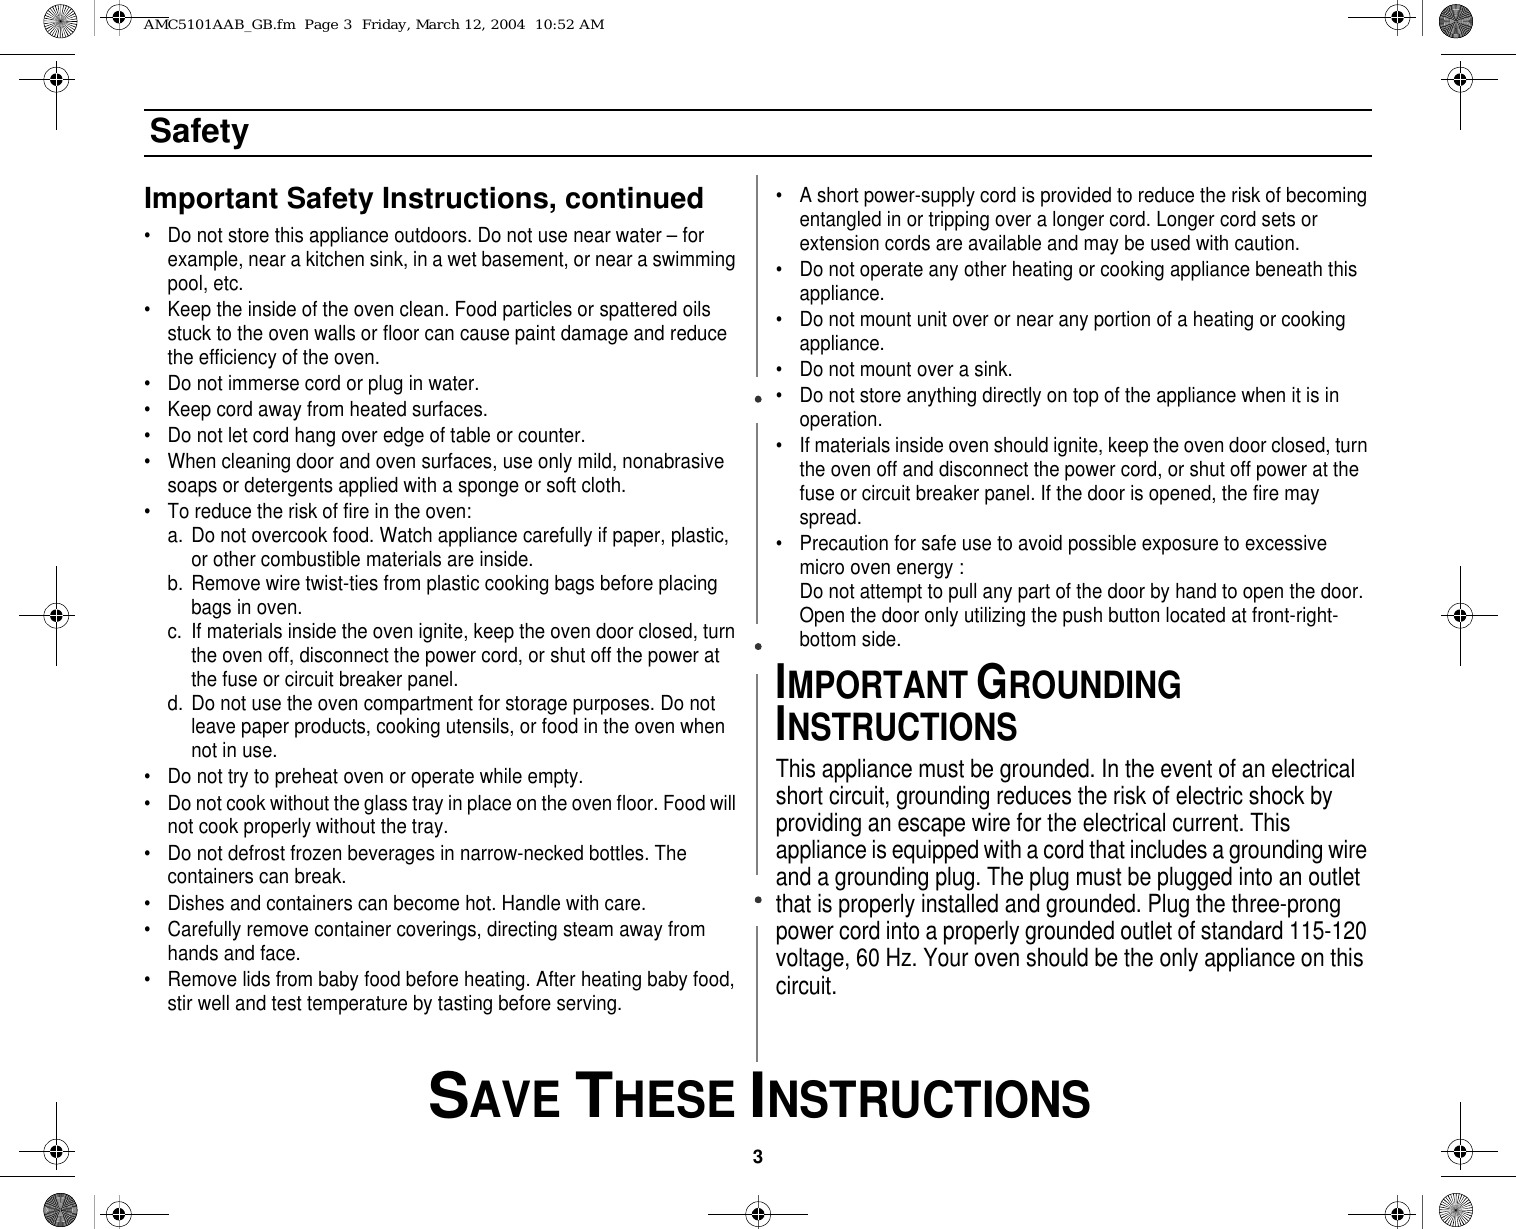 3 SAVE THESE INSTRUCTIONSSafetyImportant Safety Instructions, continued• Do not store this appliance outdoors. Do not use near water – for example, near a kitchen sink, in a wet basement, or near a swimming pool, etc. • Keep the inside of the oven clean. Food particles or spattered oils stuck to the oven walls or floor can cause paint damage and reduce the efficiency of the oven.• Do not immerse cord or plug in water.• Keep cord away from heated surfaces.• Do not let cord hang over edge of table or counter.• When cleaning door and oven surfaces, use only mild, nonabrasive soaps or detergents applied with a sponge or soft cloth.• To reduce the risk of fire in the oven:a. Do not overcook food. Watch appliance carefully if paper, plastic, or other combustible materials are inside.b. Remove wire twist-ties from plastic cooking bags before placing bags in oven.c. If materials inside the oven ignite, keep the oven door closed, turn the oven off, disconnect the power cord, or shut off the power at the fuse or circuit breaker panel.d. Do not use the oven compartment for storage purposes. Do not leave paper products, cooking utensils, or food in the oven when not in use.• Do not try to preheat oven or operate while empty.• Do not cook without the glass tray in place on the oven floor. Food will not cook properly without the tray.• Do not defrost frozen beverages in narrow-necked bottles. The containers can break.• Dishes and containers can become hot. Handle with care.• Carefully remove container coverings, directing steam away from hands and face.• Remove lids from baby food before heating. After heating baby food, stir well and test temperature by tasting before serving.• A short power-supply cord is provided to reduce the risk of becoming entangled in or tripping over a longer cord. Longer cord sets or extension cords are available and may be used with caution. • Do not operate any other heating or cooking appliance beneath this appliance.• Do not mount unit over or near any portion of a heating or cooking appliance.• Do not mount over a sink.• Do not store anything directly on top of the appliance when it is in operation.• If materials inside oven should ignite, keep the oven door closed, turn the oven off and disconnect the power cord, or shut off power at the fuse or circuit breaker panel. If the door is opened, the fire may spread.• Precaution for safe use to avoid possible exposure to excessive micro oven energy :Do not attempt to pull any part of the door by hand to open the door. Open the door only utilizing the push button located at front-right-bottom side.IMPORTANT GROUNDING INSTRUCTIONSThis appliance must be grounded. In the event of an electrical short circuit, grounding reduces the risk of electric shock by providing an escape wire for the electrical current. This appliance is equipped with a cord that includes a grounding wire and a grounding plug. The plug must be plugged into an outlet that is properly installed and grounded. Plug the three-prong power cord into a properly grounded outlet of standard 115-120 voltage, 60 Hz. Your oven should be the only appliance on this circuit.AMC5101AAB_GB.fm  Page 3  Friday, March 12, 2004  10:52 AM